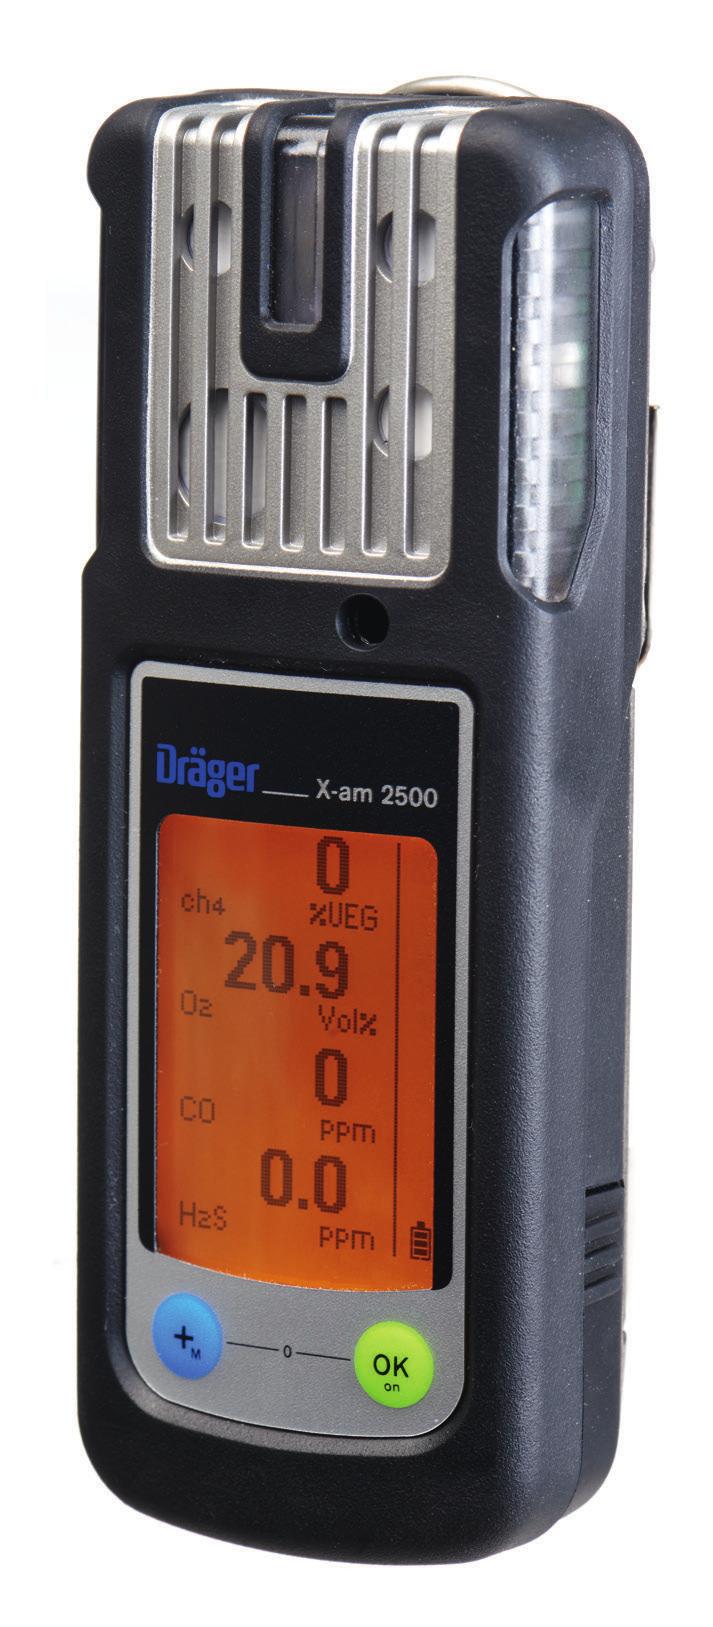 Dräger X-am 2500 Multi-Gas Detector The Dräger X-am 2500 was especially developed for use as personal protection.